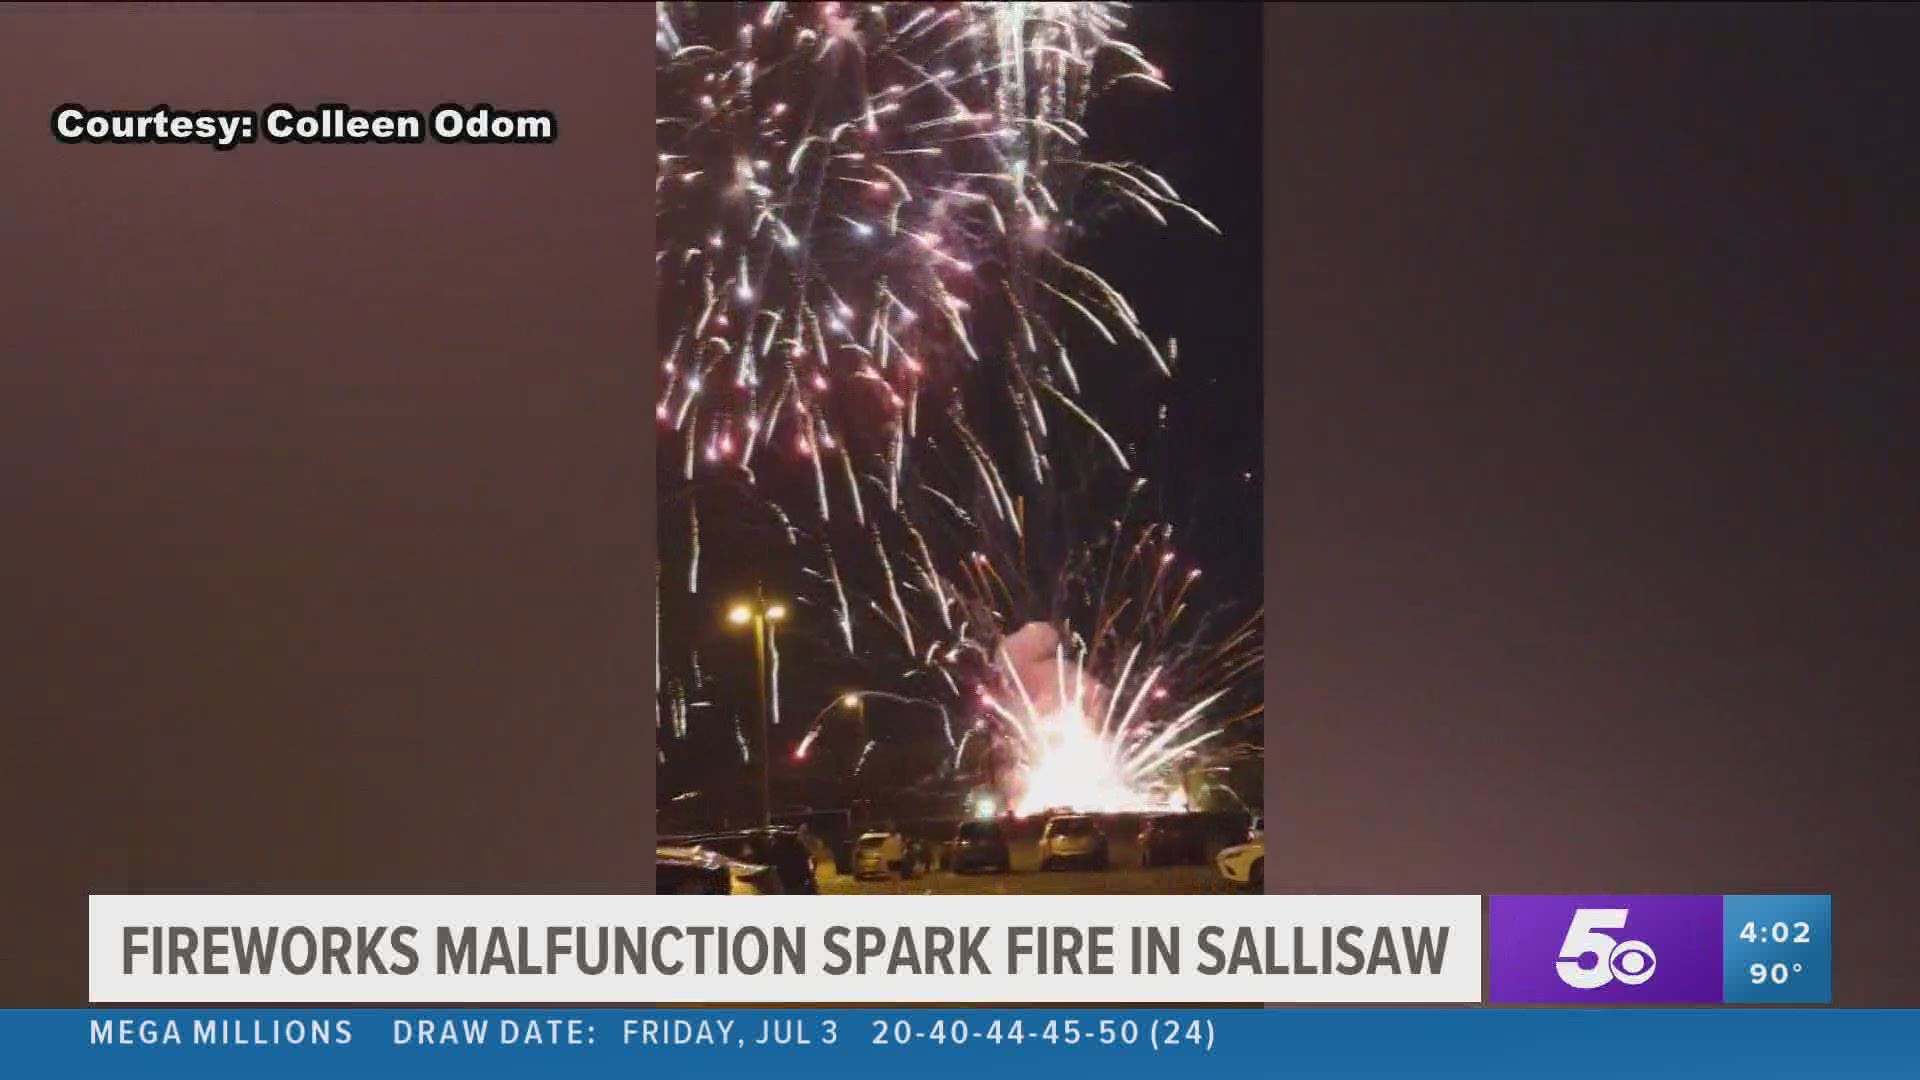 The City of Sallisaw's Fourth of July fireworks display was cut short over the weekend after a malfunction caused sparks to fly near attendees.